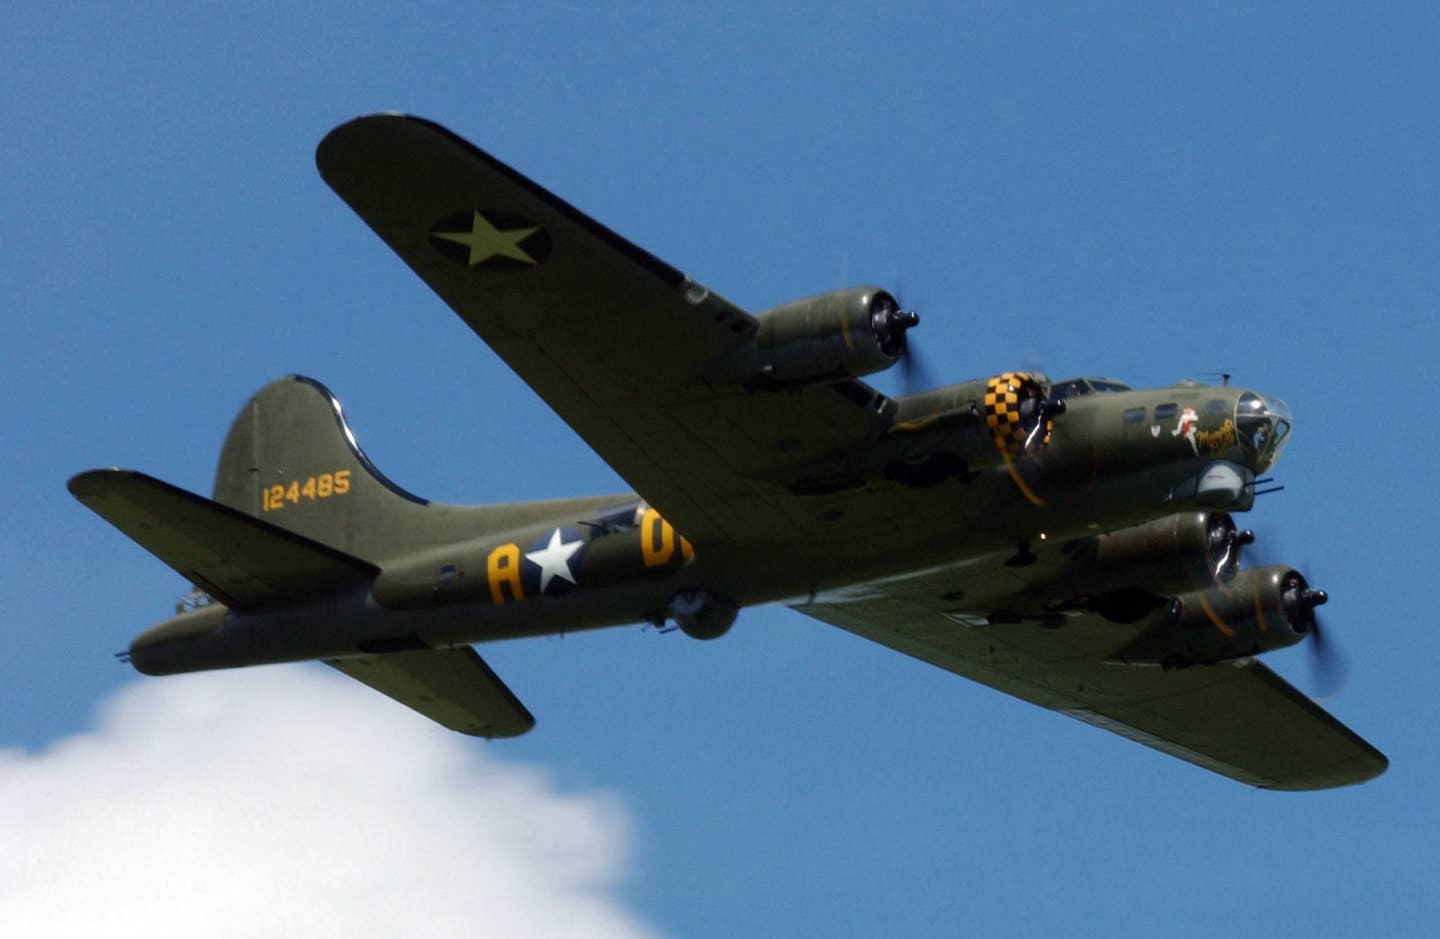 The "Sally B" B-17 Flying Fortress bomber aircraft flies overhead during the Memorial Day ceremony held at the Madingley American Cemetery near the city of Cambridge, England (ENG), in honor of the World War II fallen.